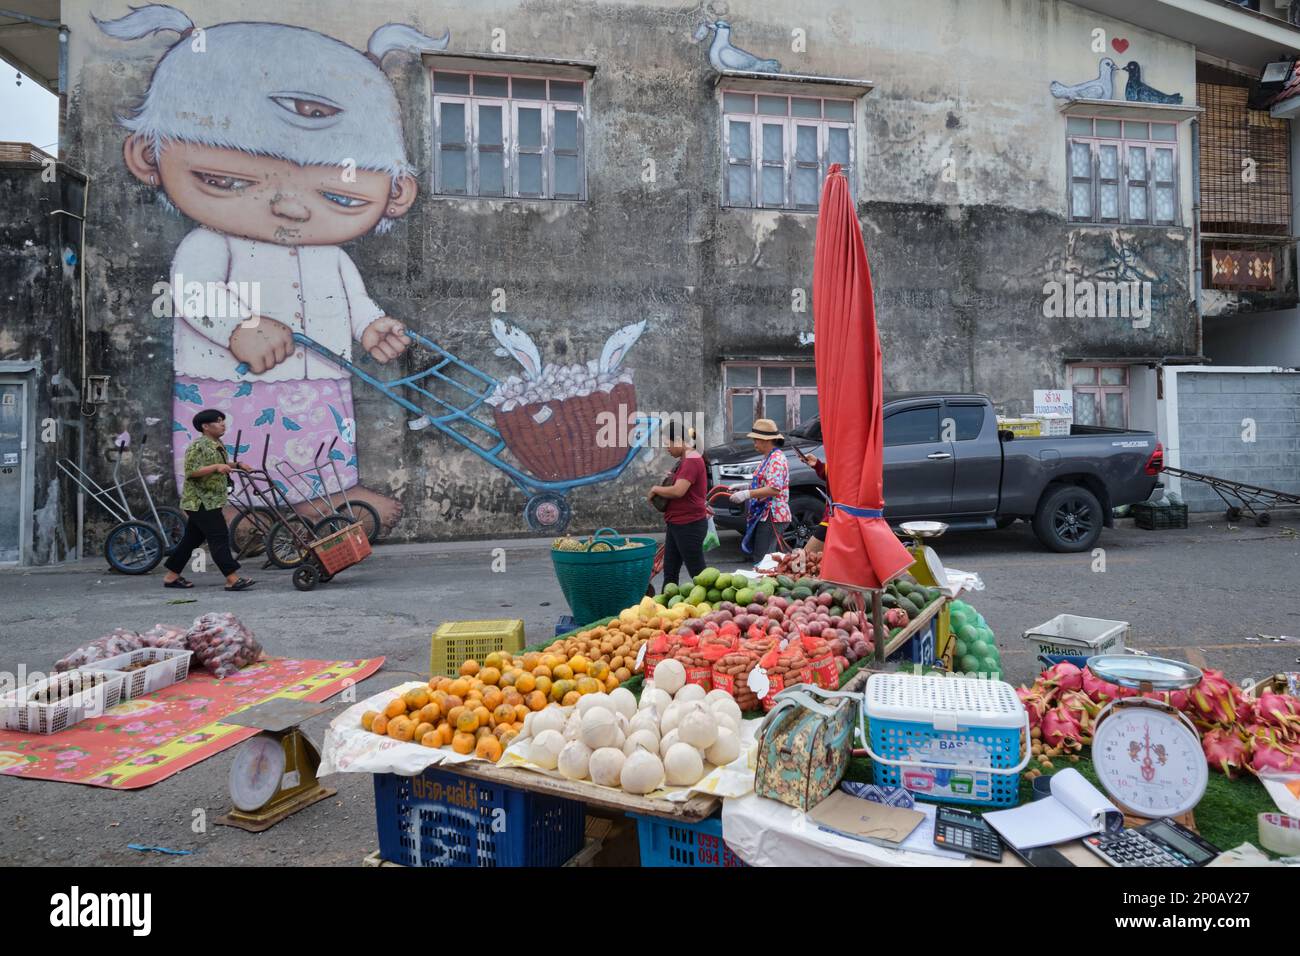 A mural by artist Alex Face in the wet market of Phuket Town, Thailand, displaying his three-eyed trademark character Mardi working as a market porter Stock Photo